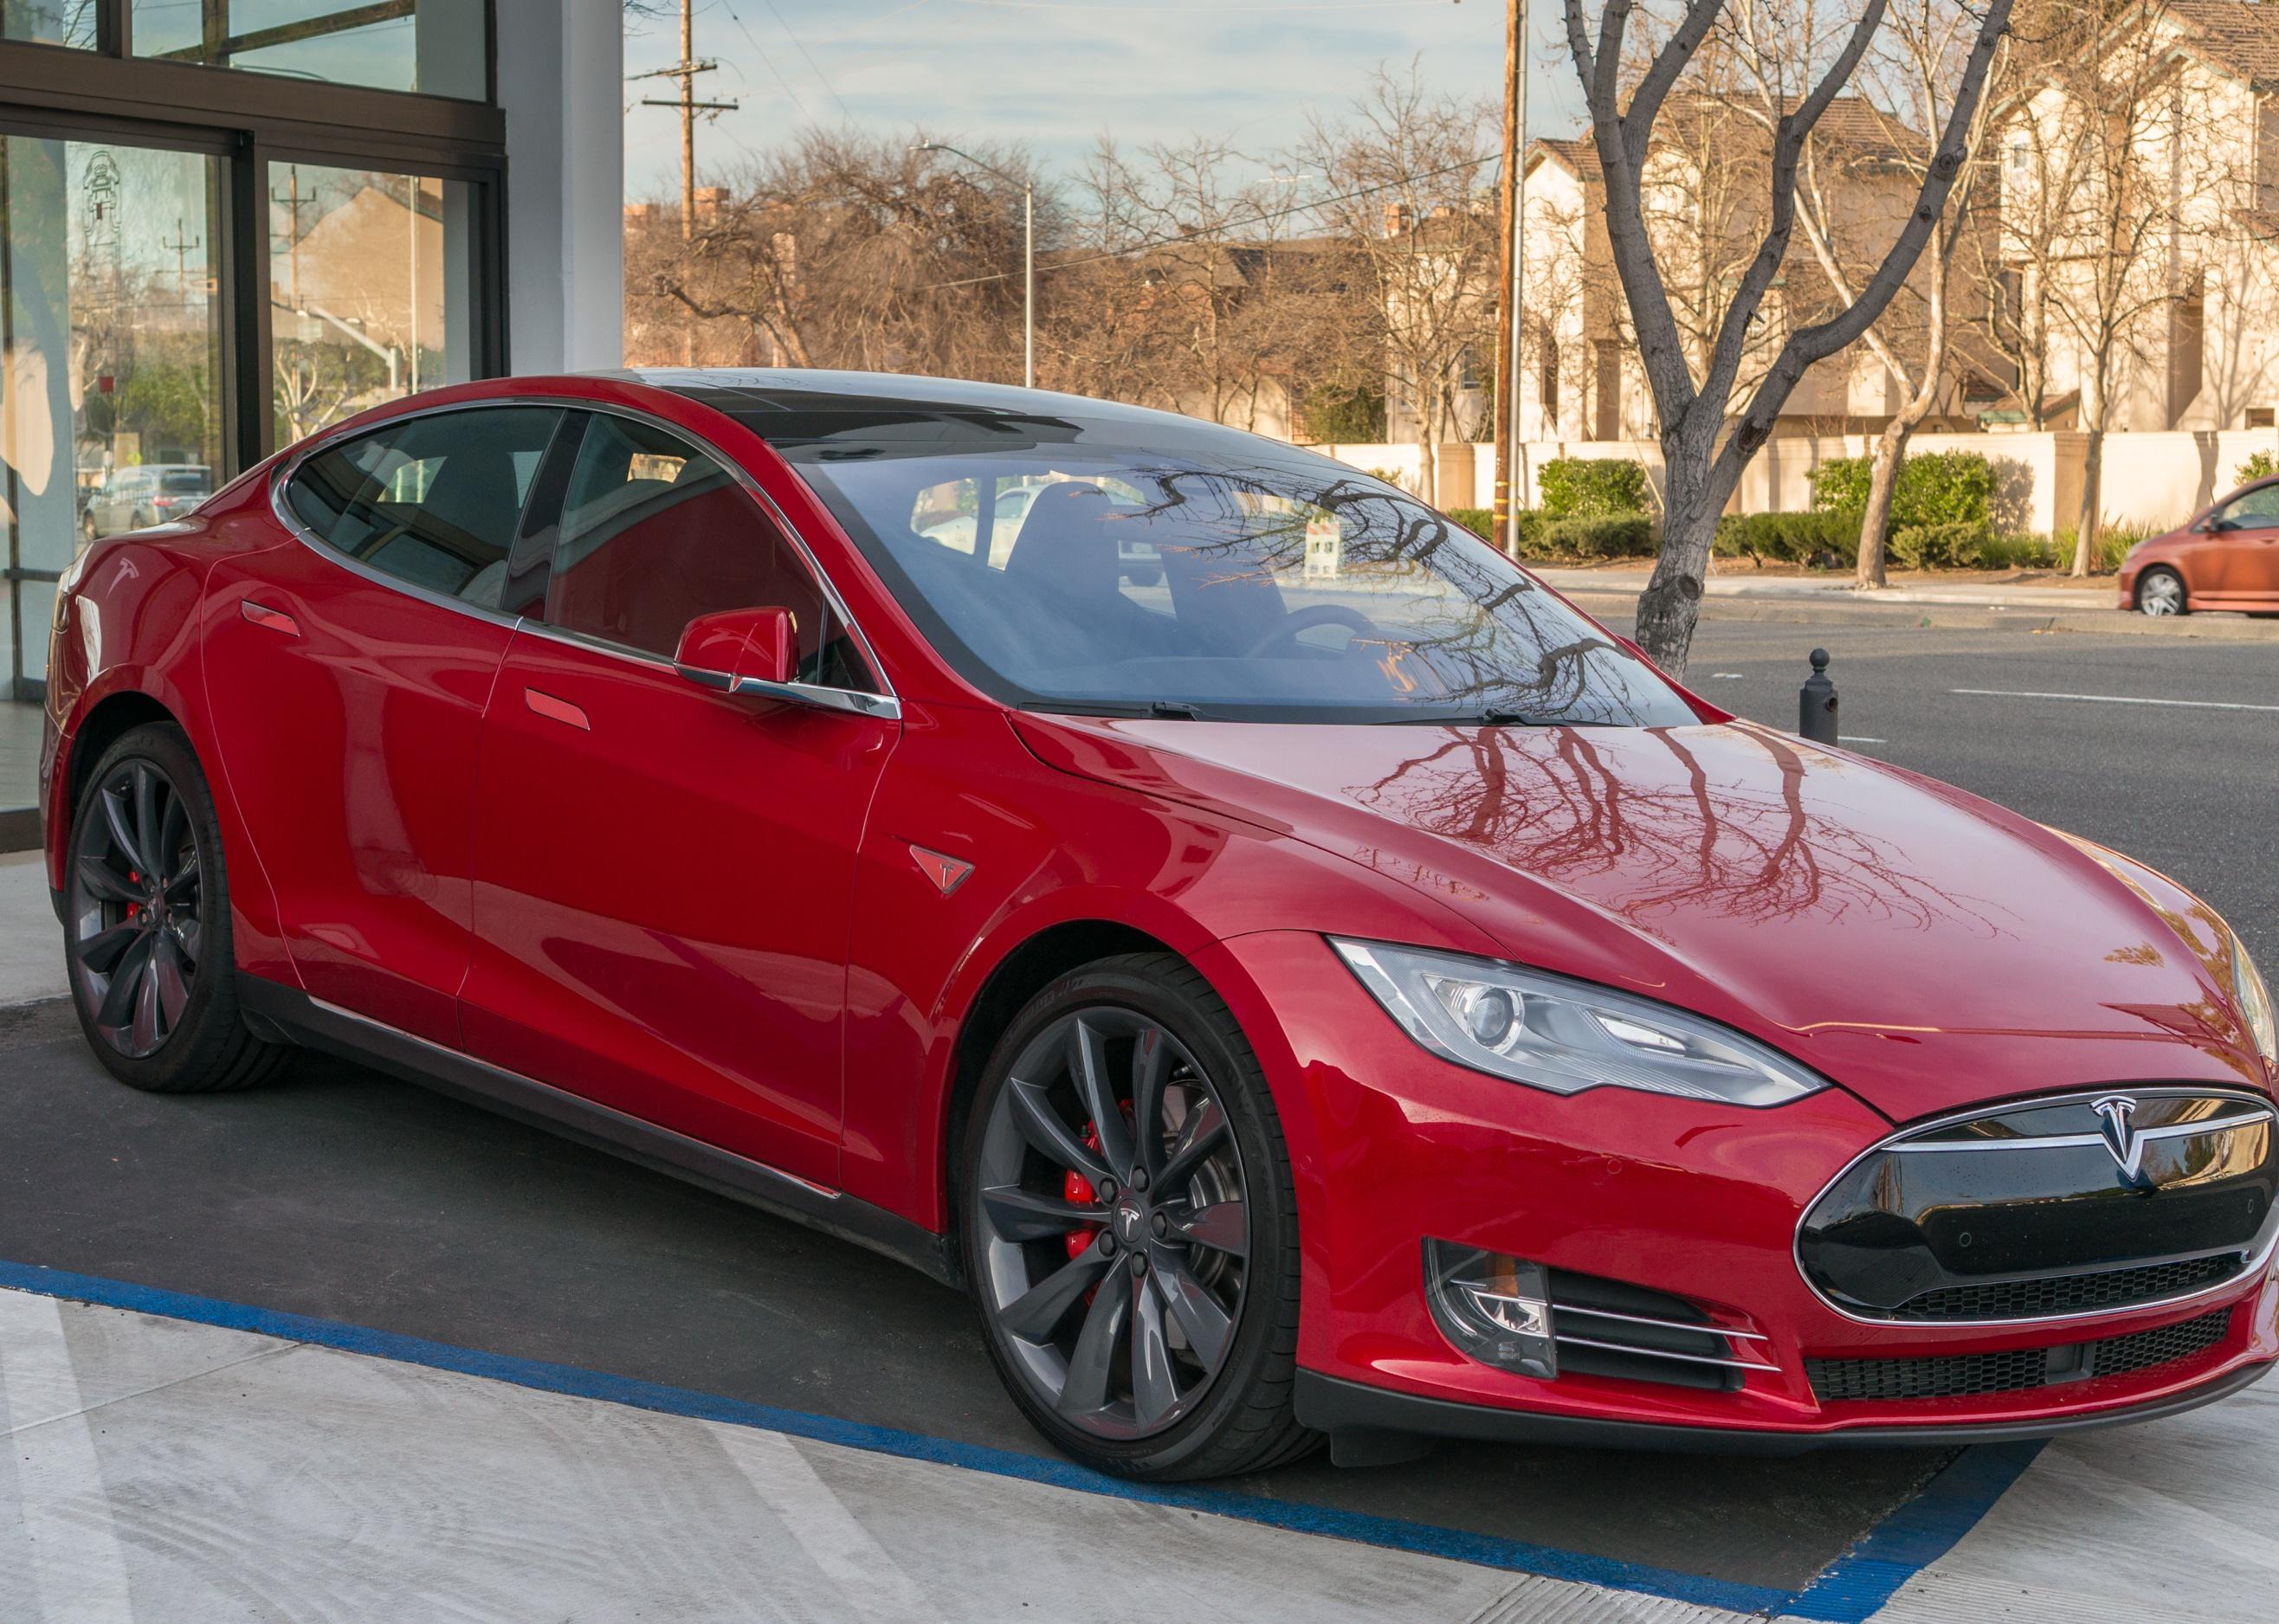 A red Tesla Model S on display outside. 